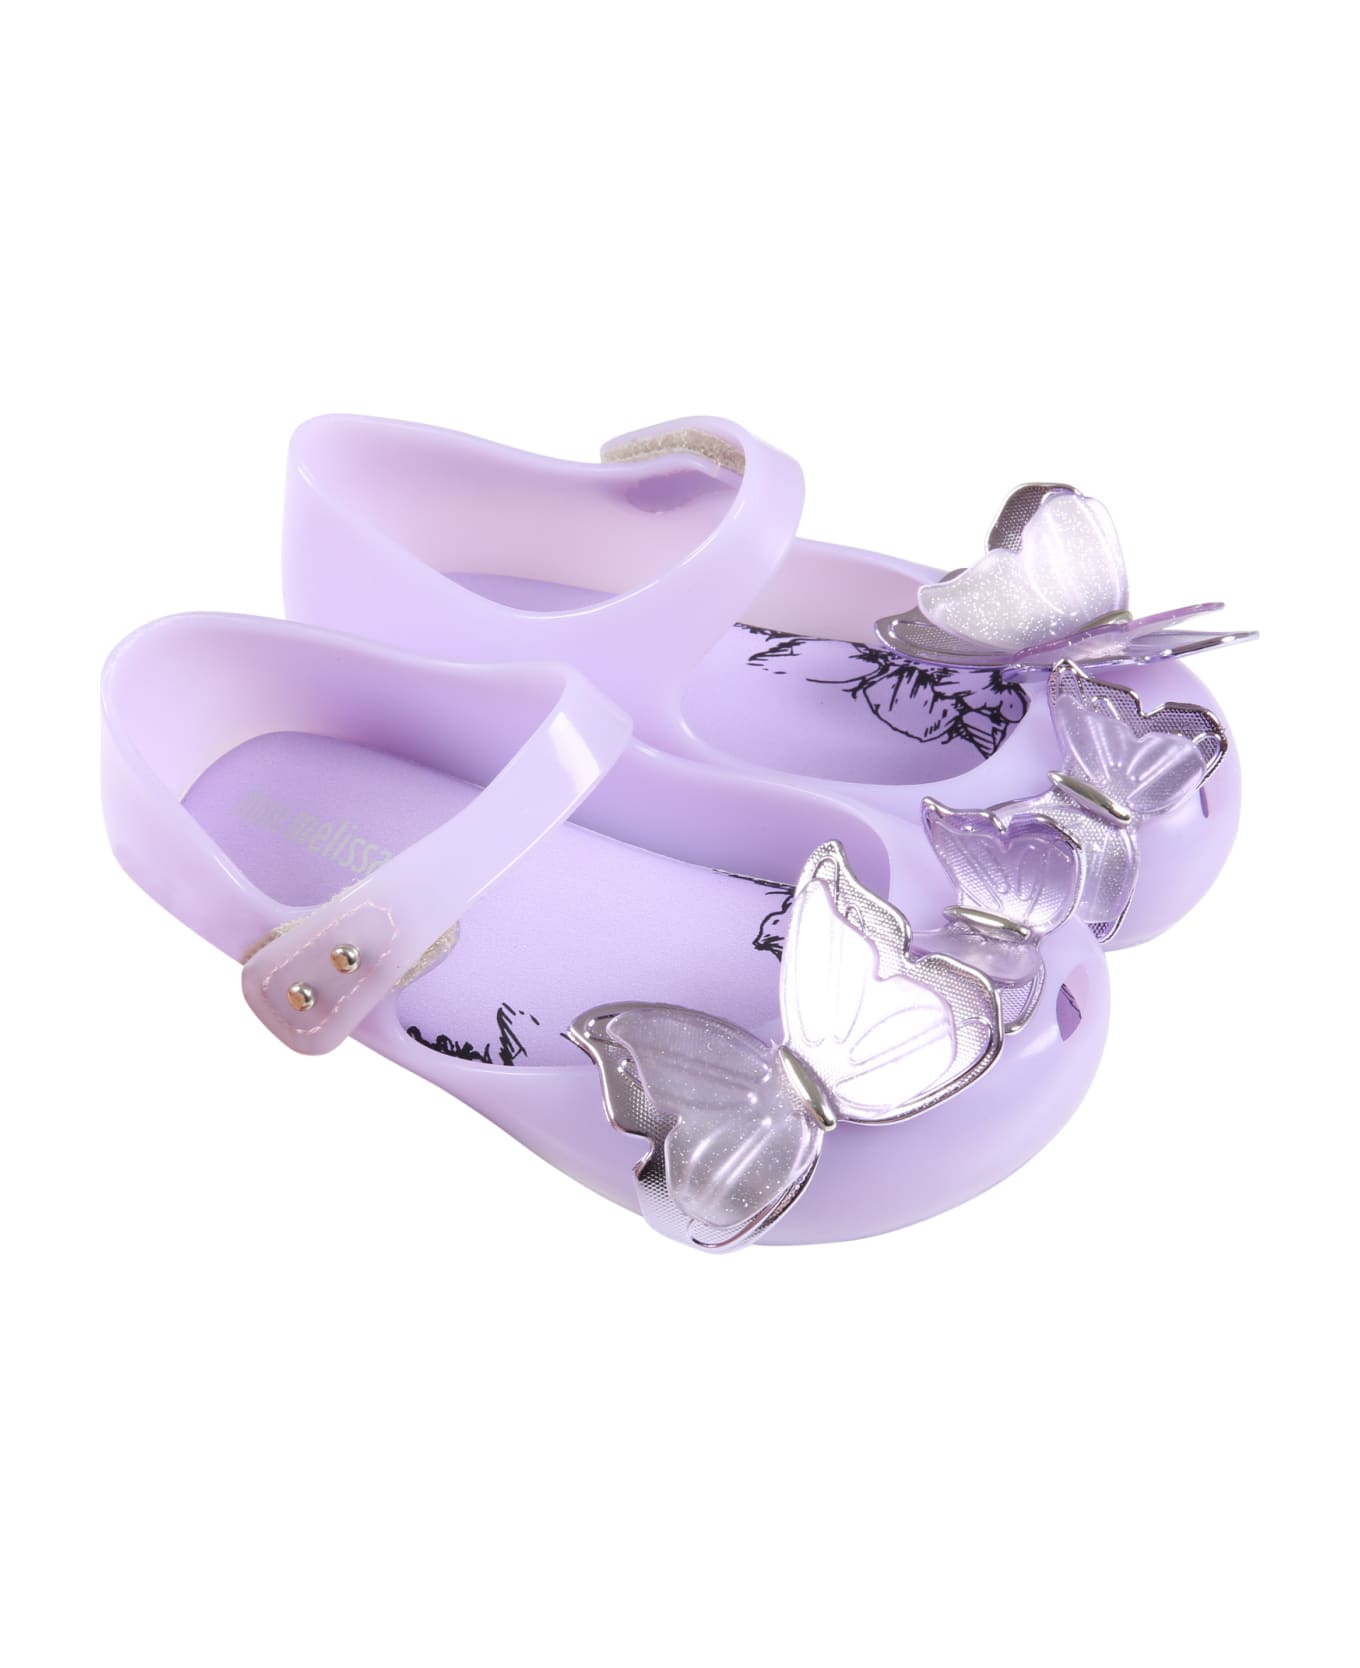 Melissa Lilac Ballerinas For Girl With Butterflies - Violet